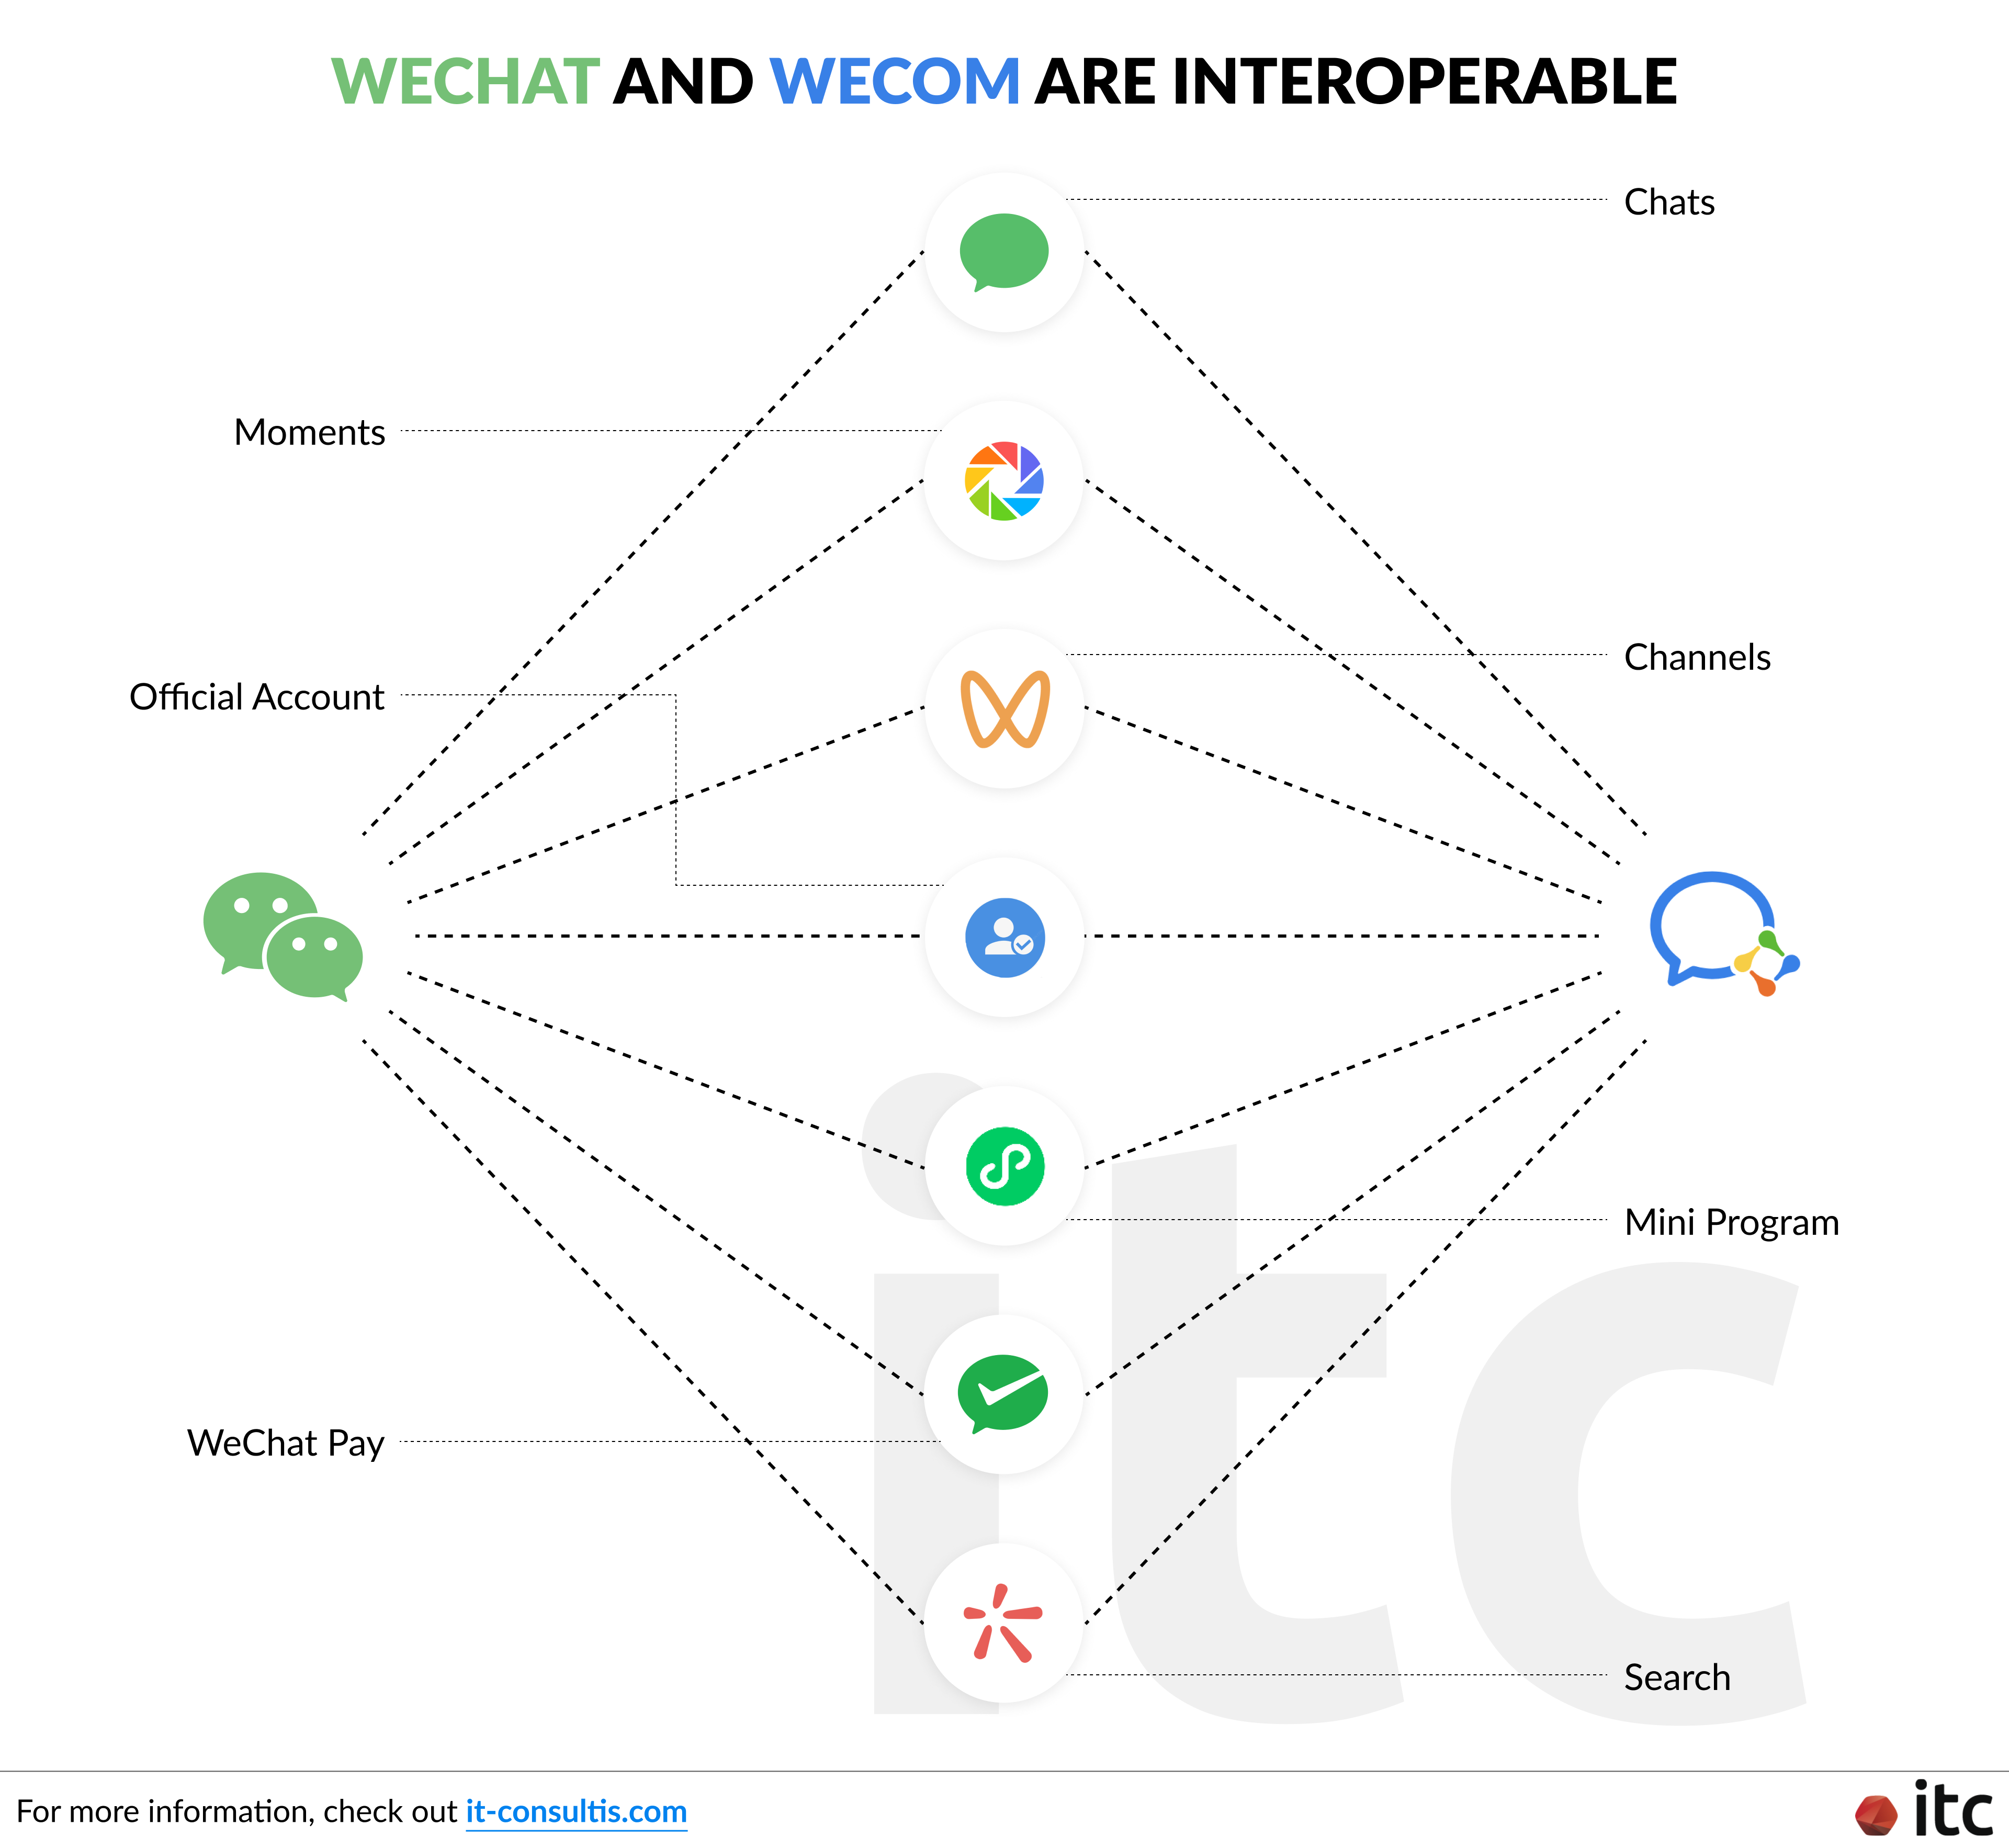 WeChat and WeCom (WeChat Work) are interoperable. WeCom can redirect users to different channels within the WeChat ecosystem, including Chats, Moments, Channels, Official Account, Mini Program, WeChat Pay, Search, and vice versa.